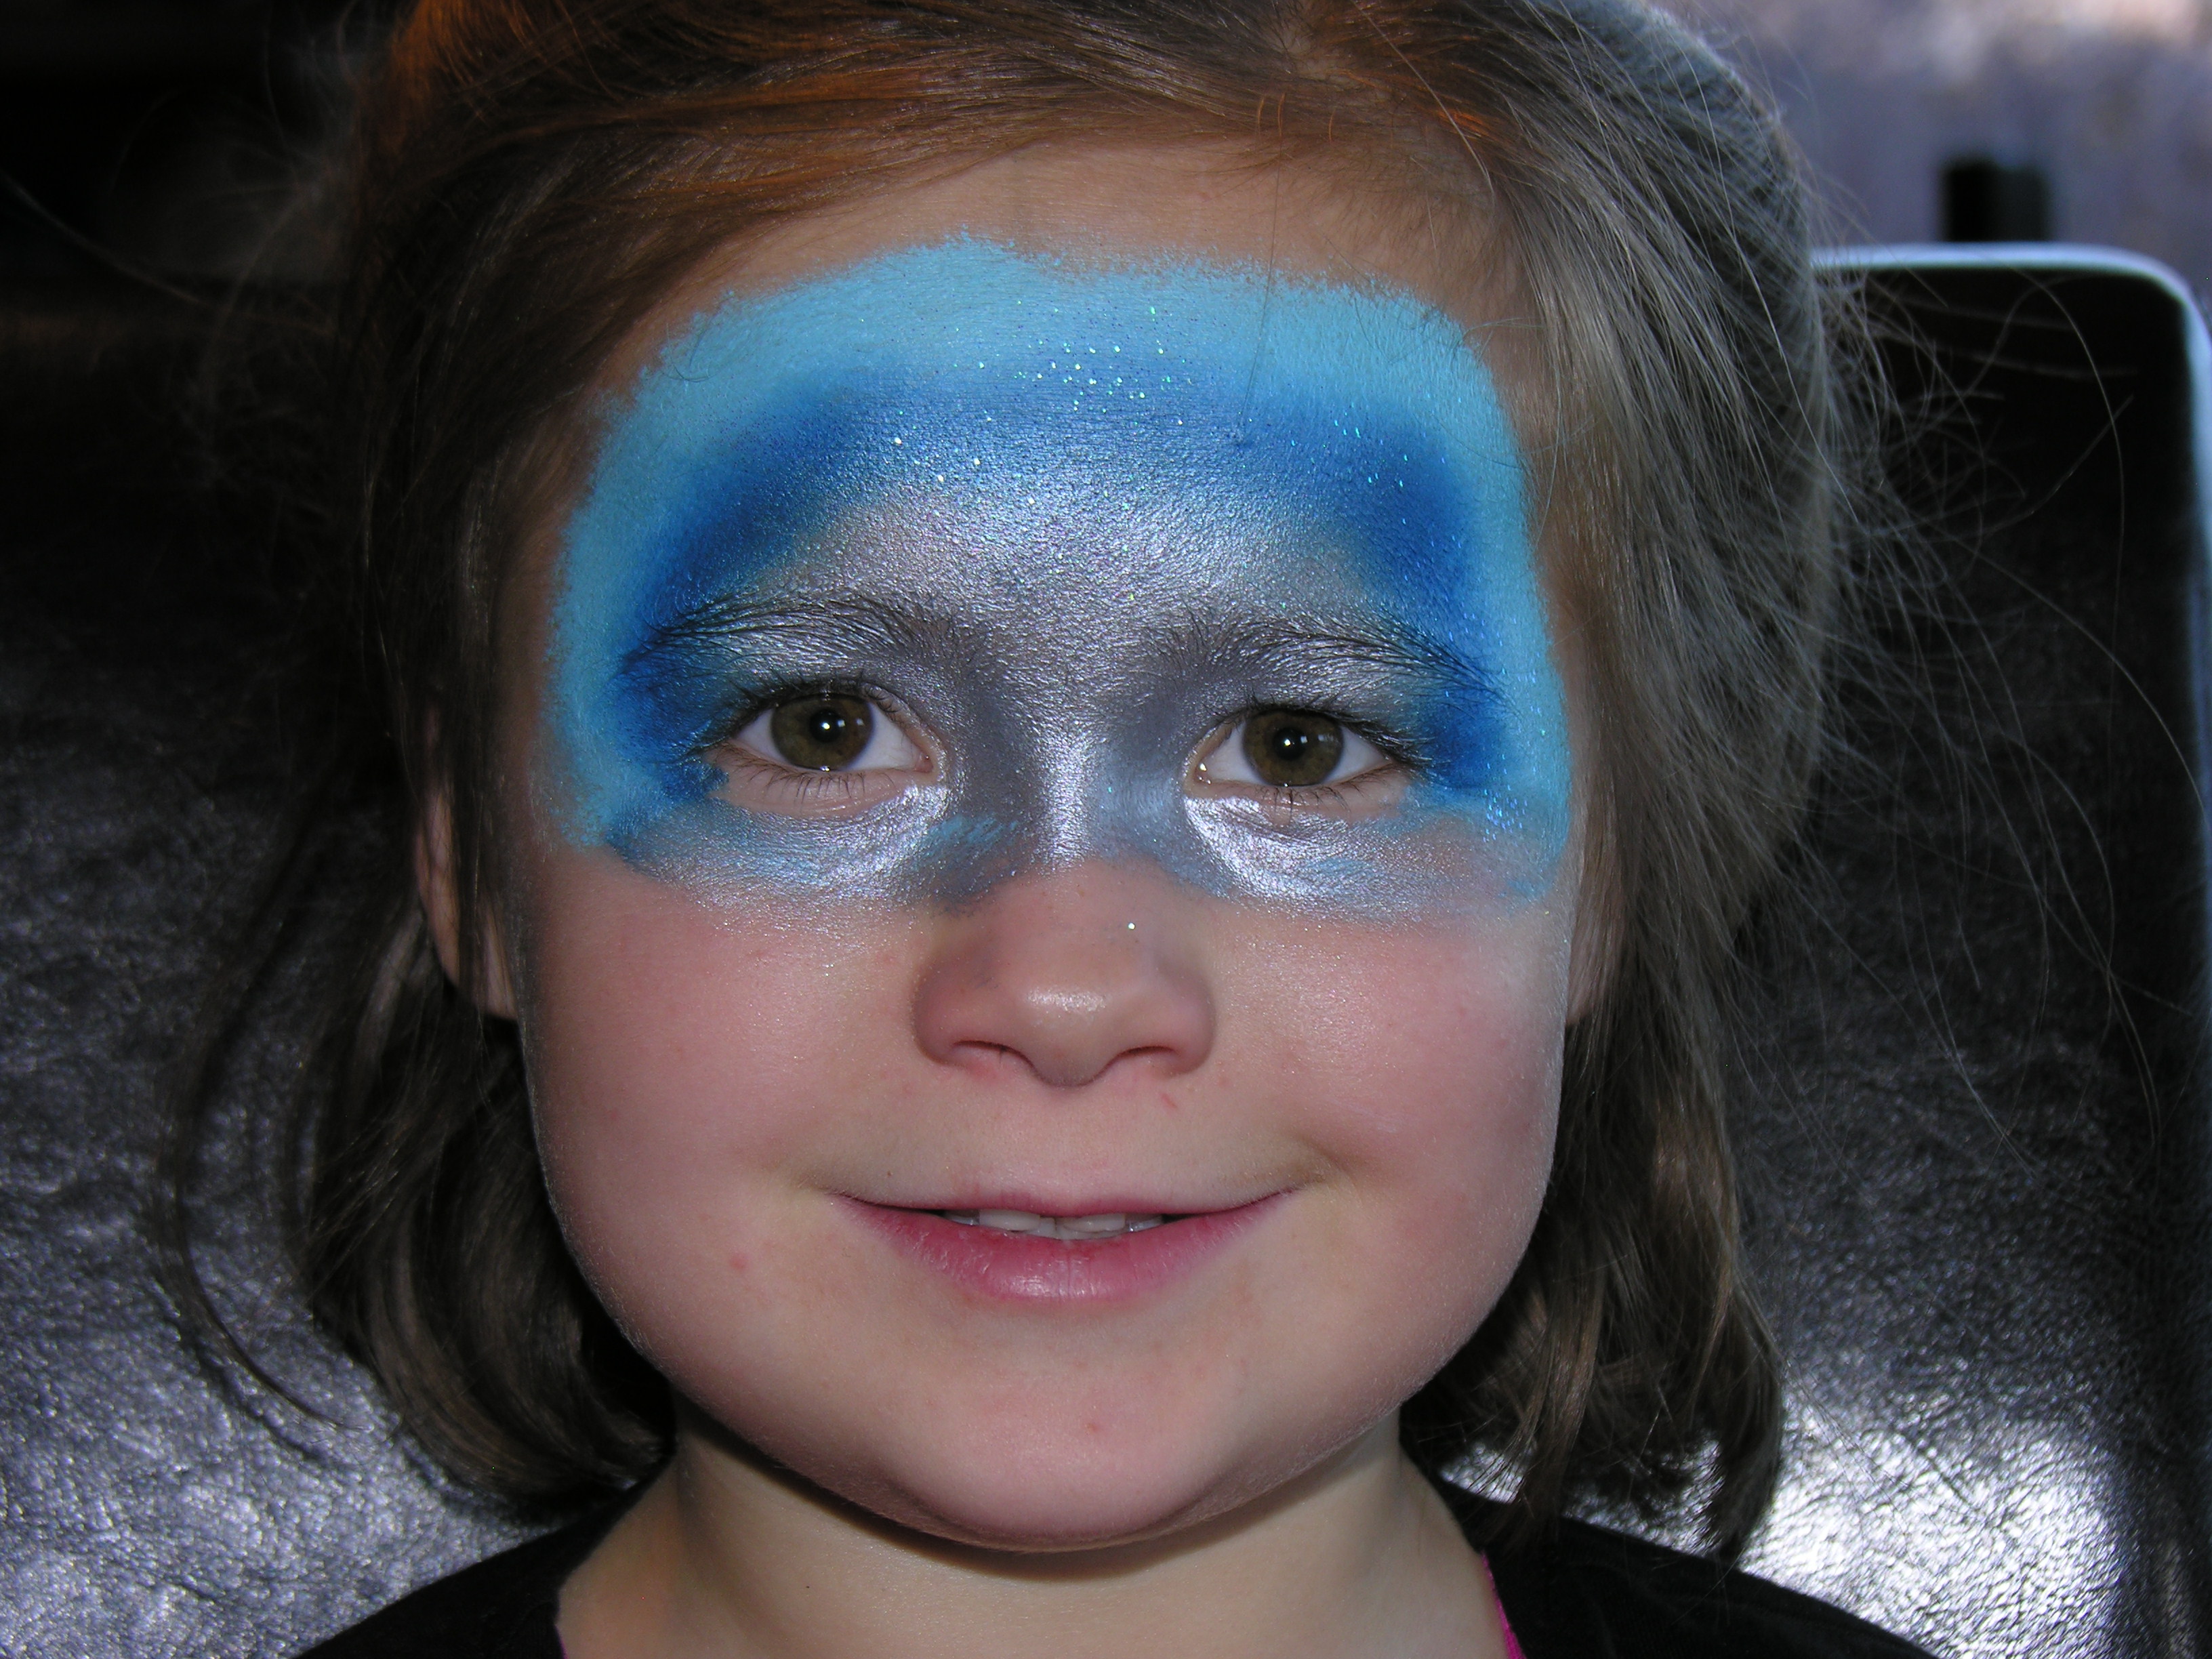 easy fairy face painting